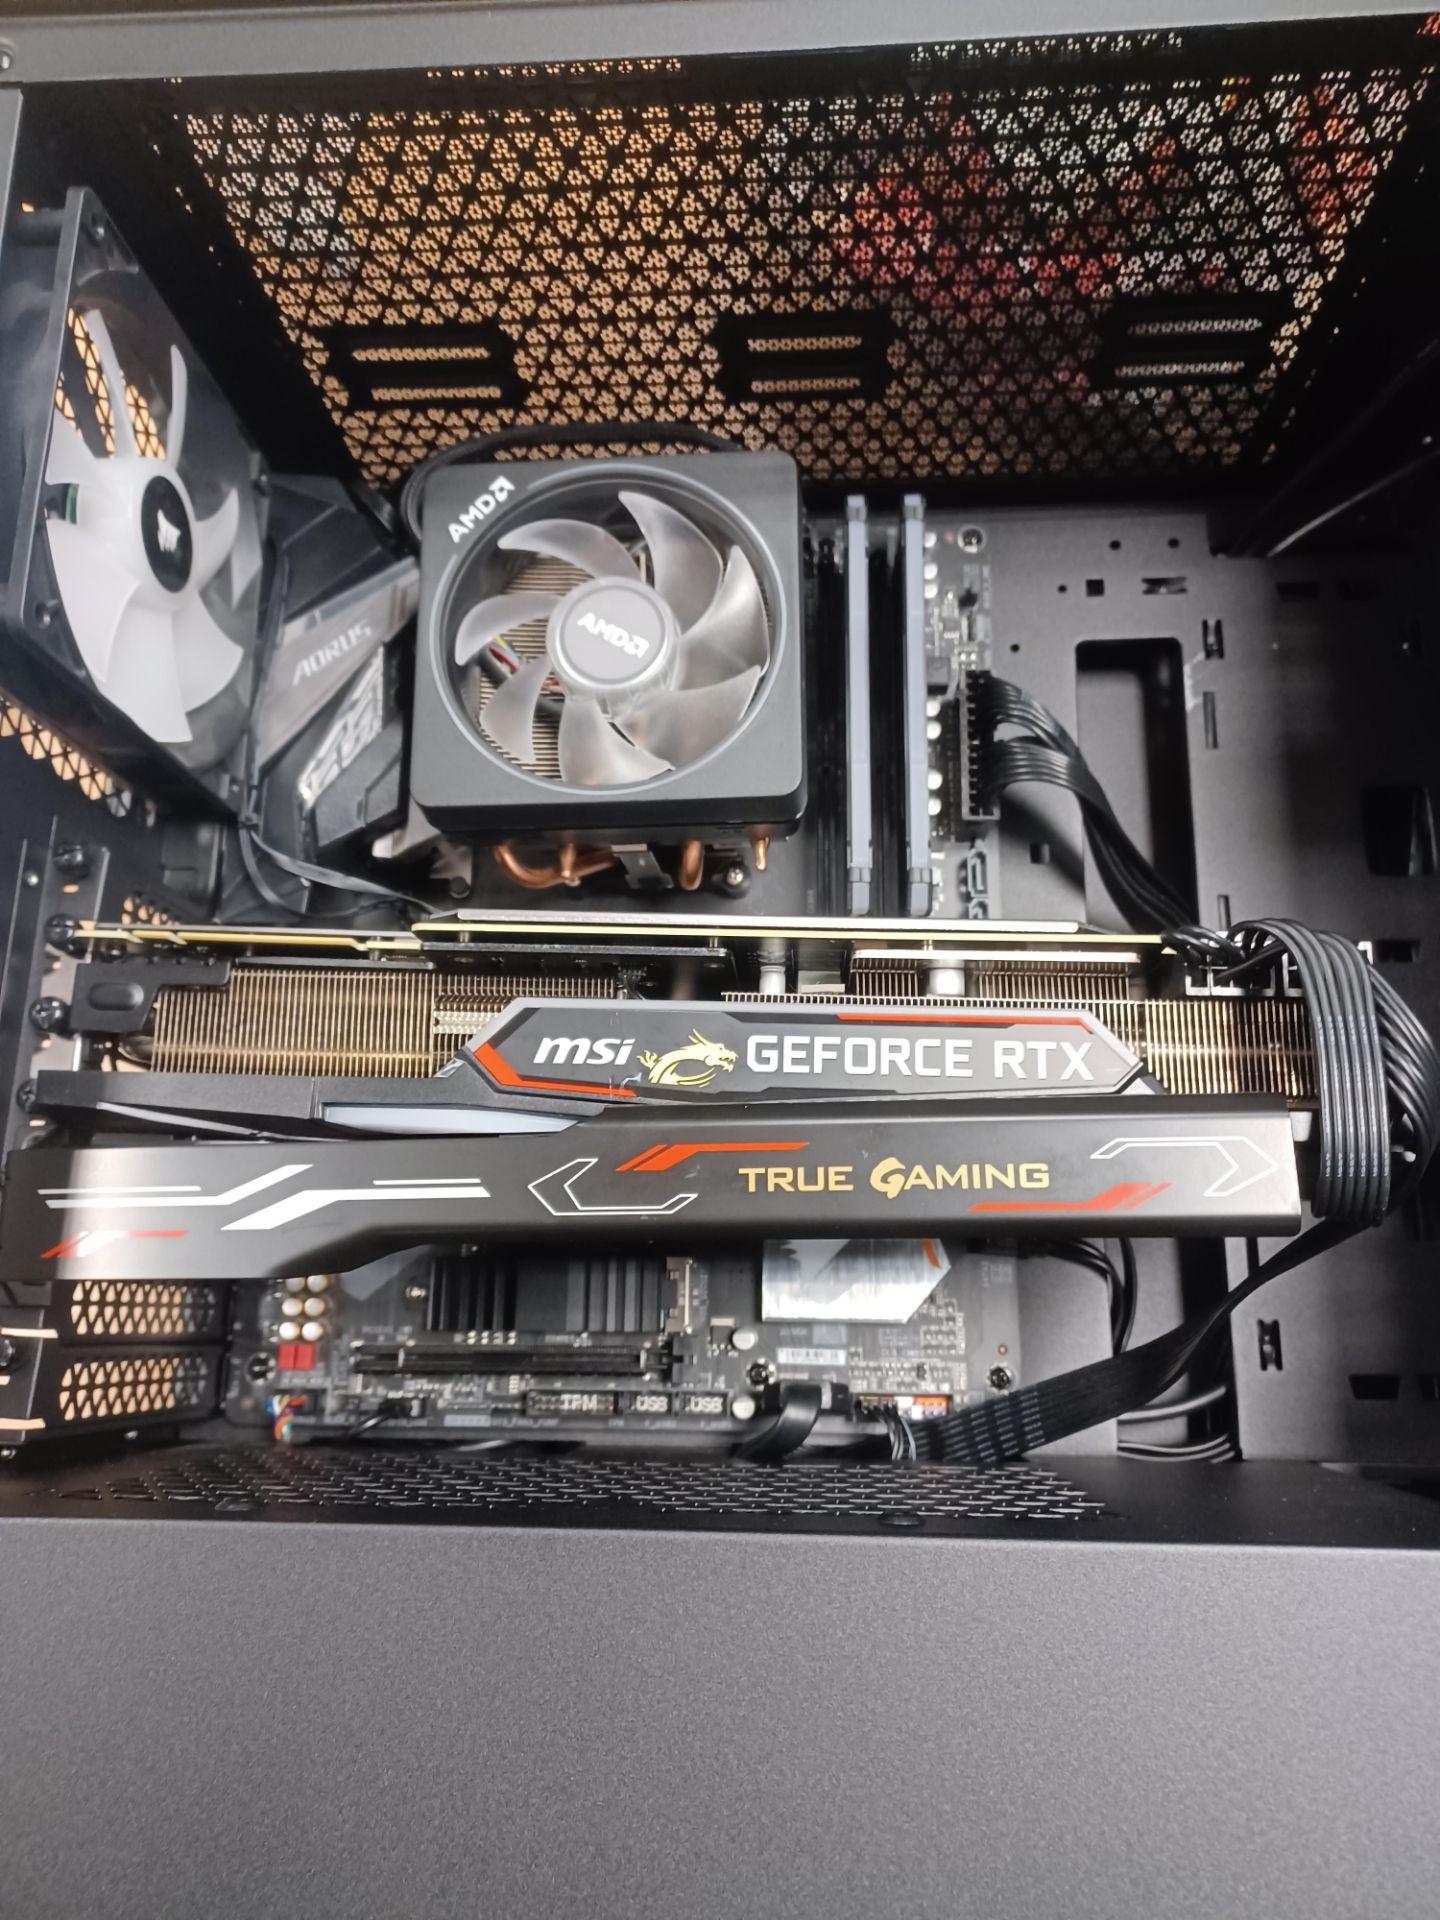 Custom Built PC with Corsair Gaming Case; MSI GeForce RTX 2070 Super Gaming X Trio Graphics Card, - Image 3 of 4